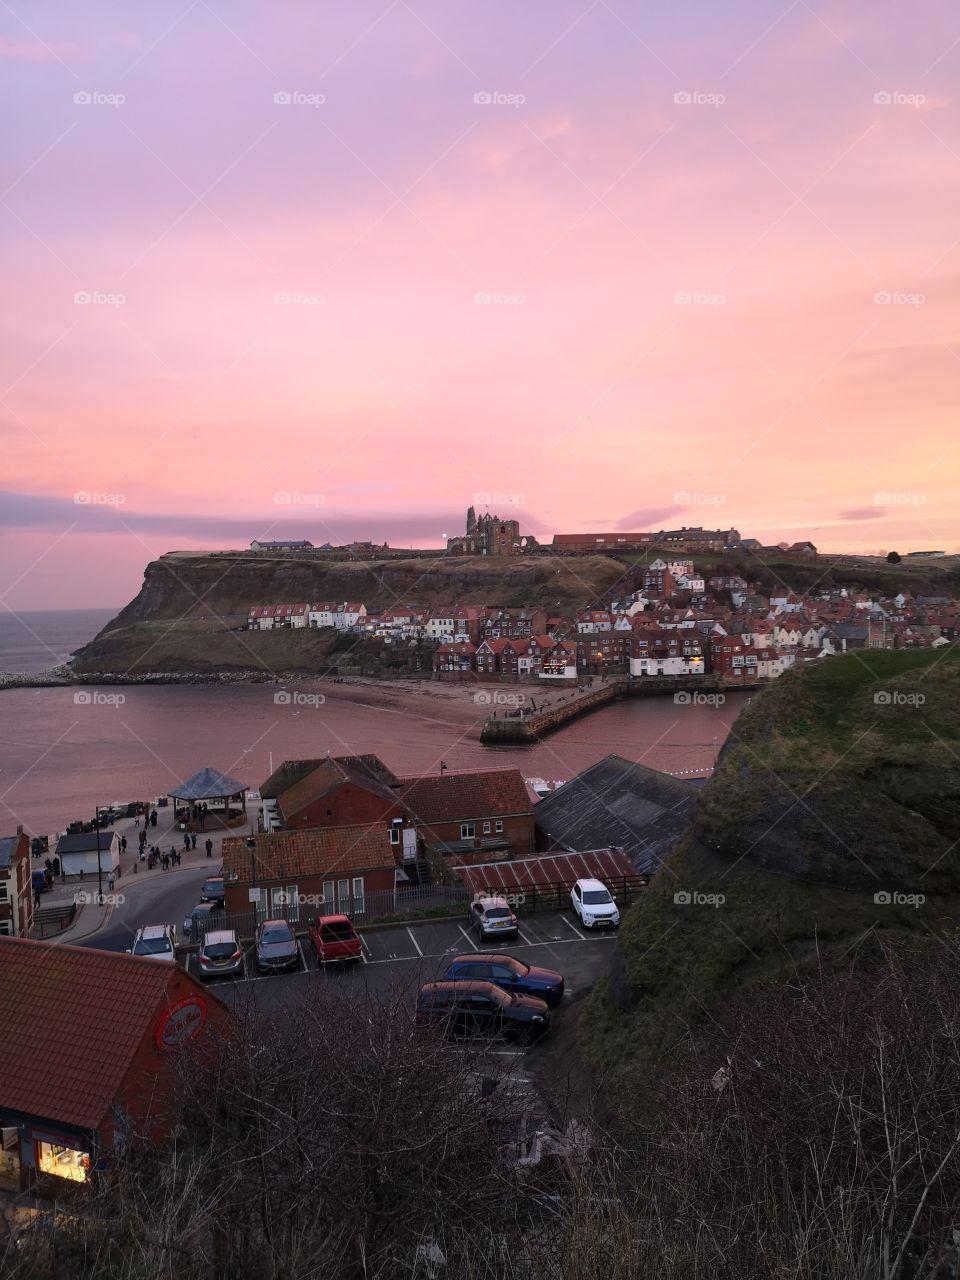 Sunset over Whitby Abbey with the sea and houses in foreground